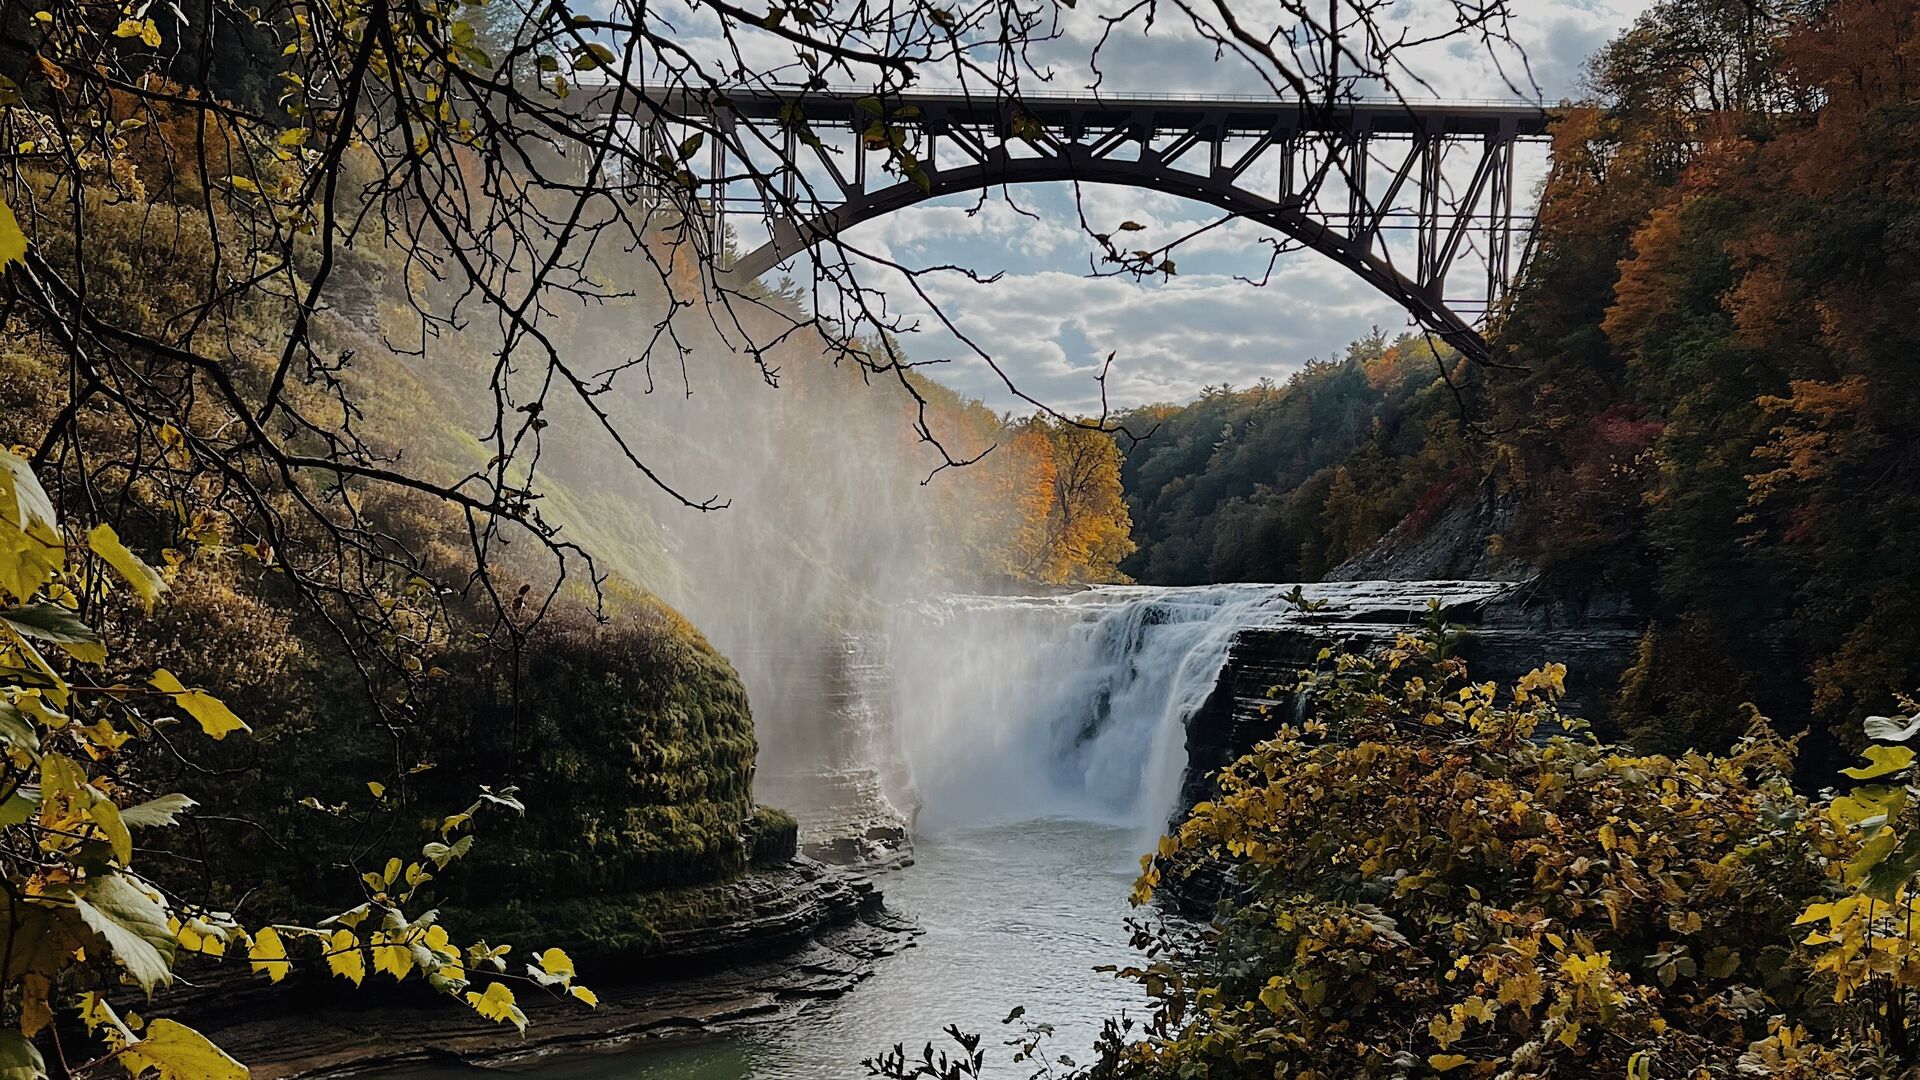 Waterfall and bridge in the fall in Letchworth NY State Park.